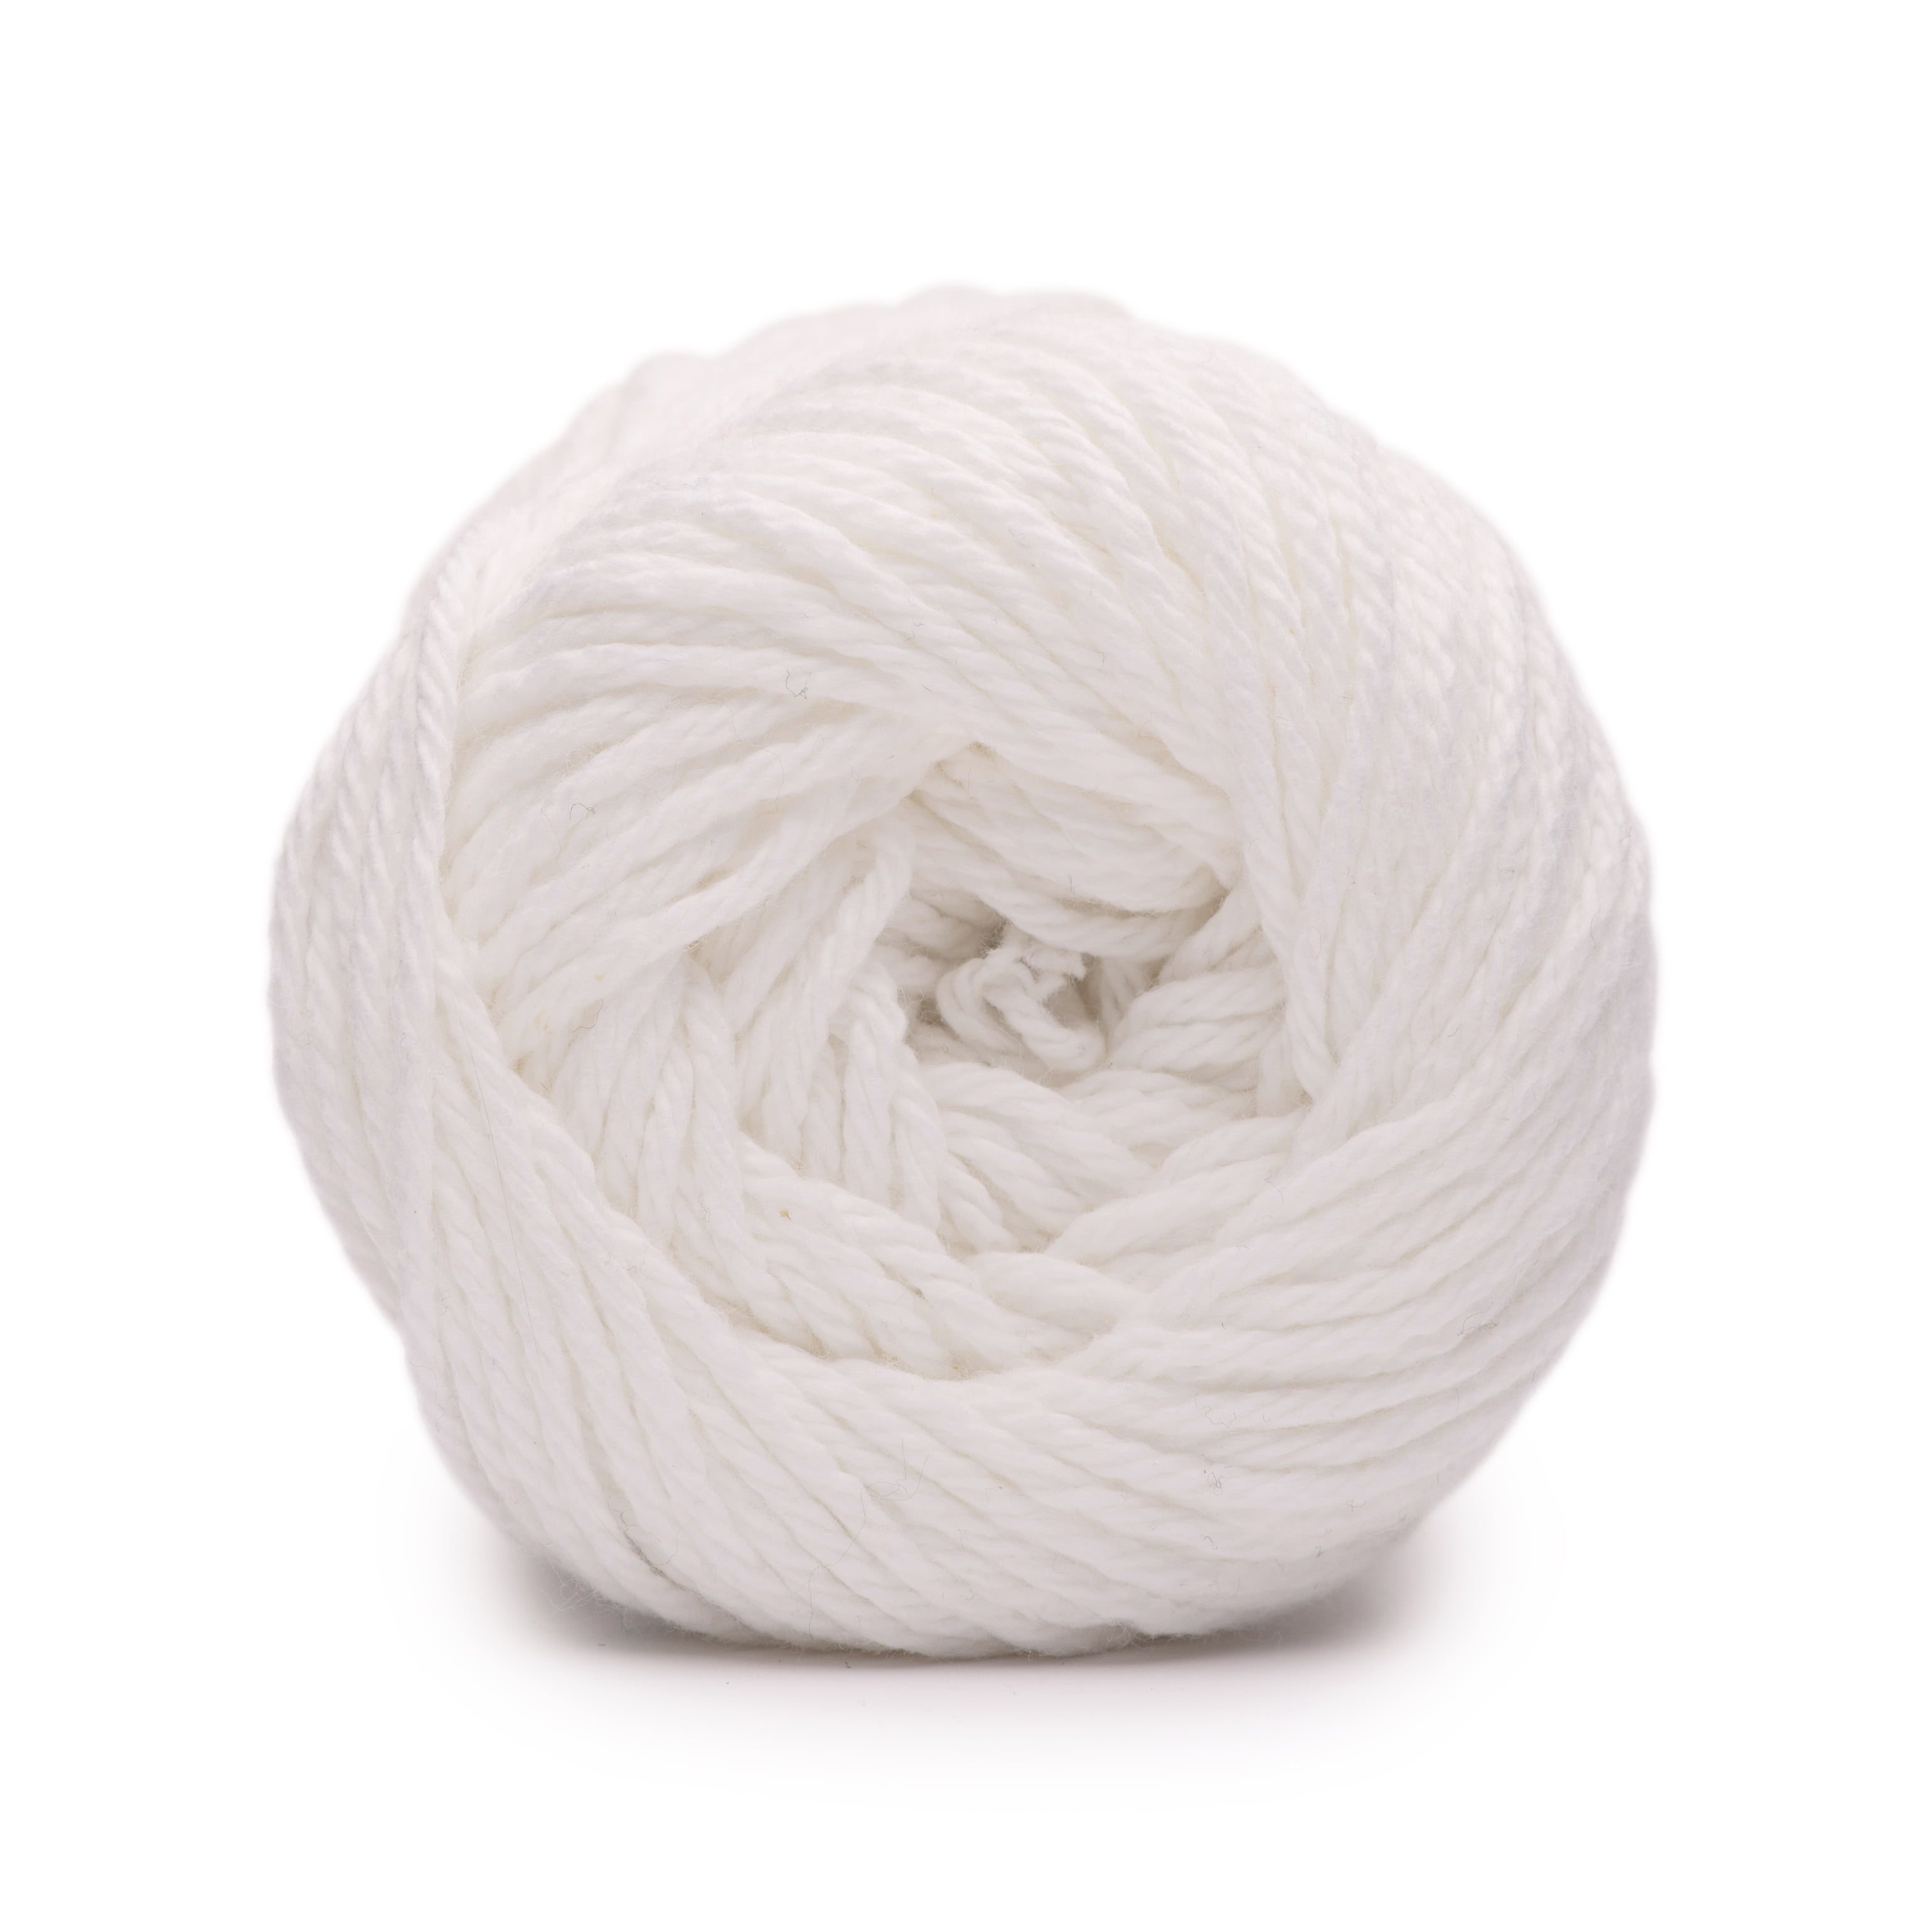 YARN CONE - WHITE Total 2 lbs. 8 oz. Very THIN, Stains - #114